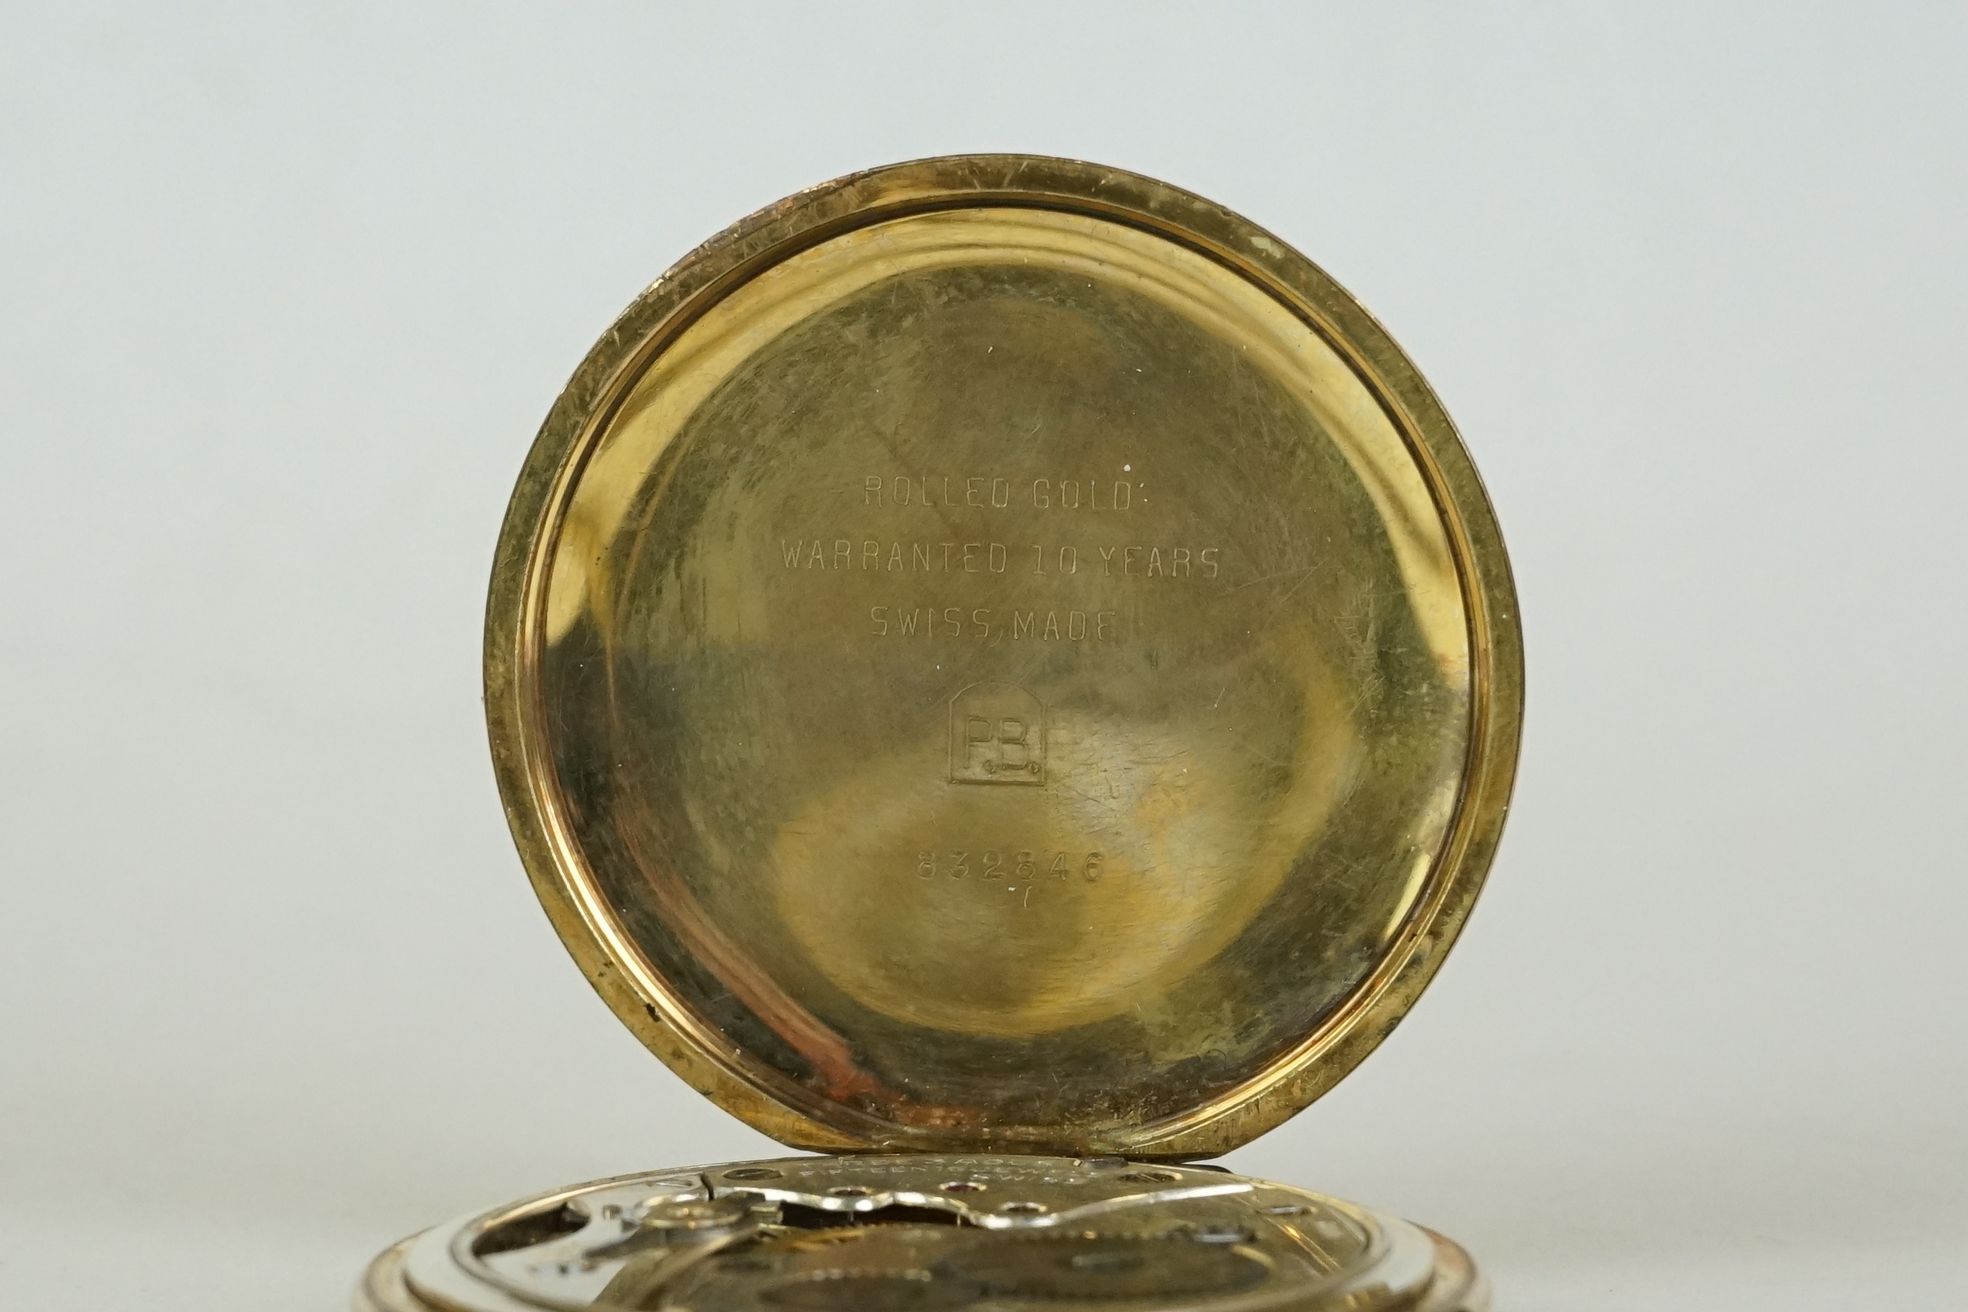 Rolled gold open faced Citadel pocket watch with gilt Albert chain - Image 5 of 5